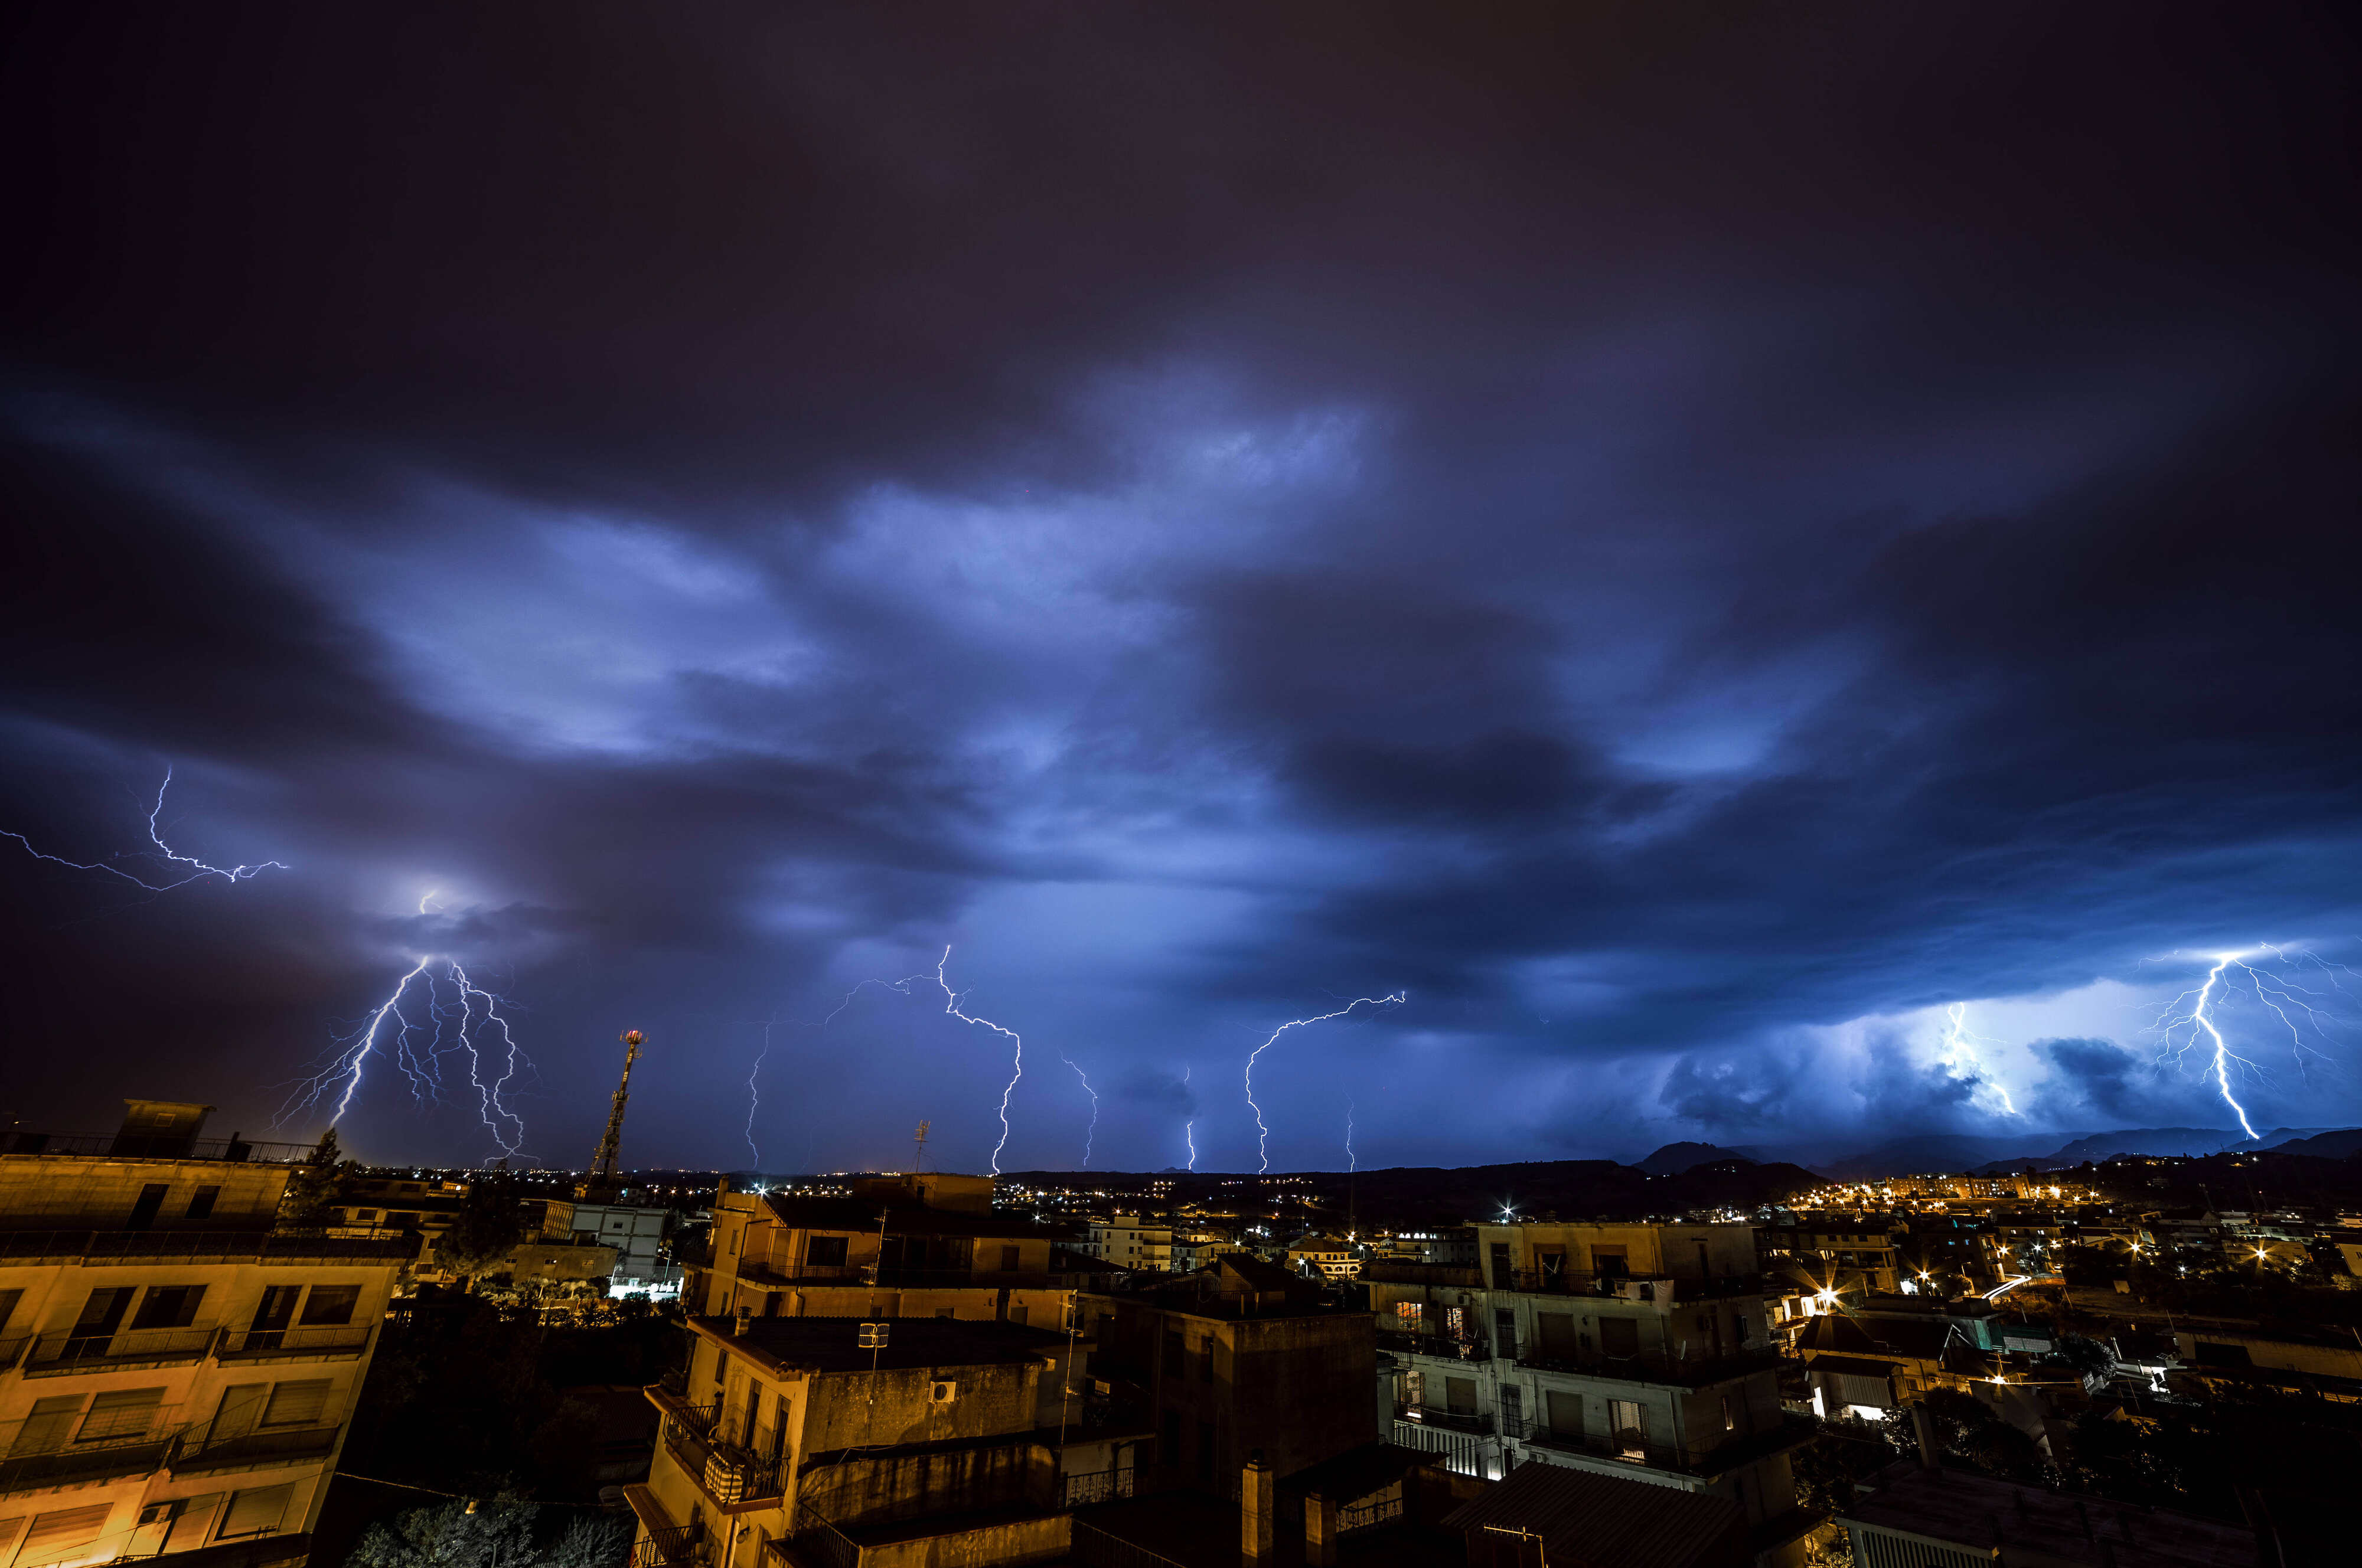 Lightning does strike twice whenever you use these lightning storm photos